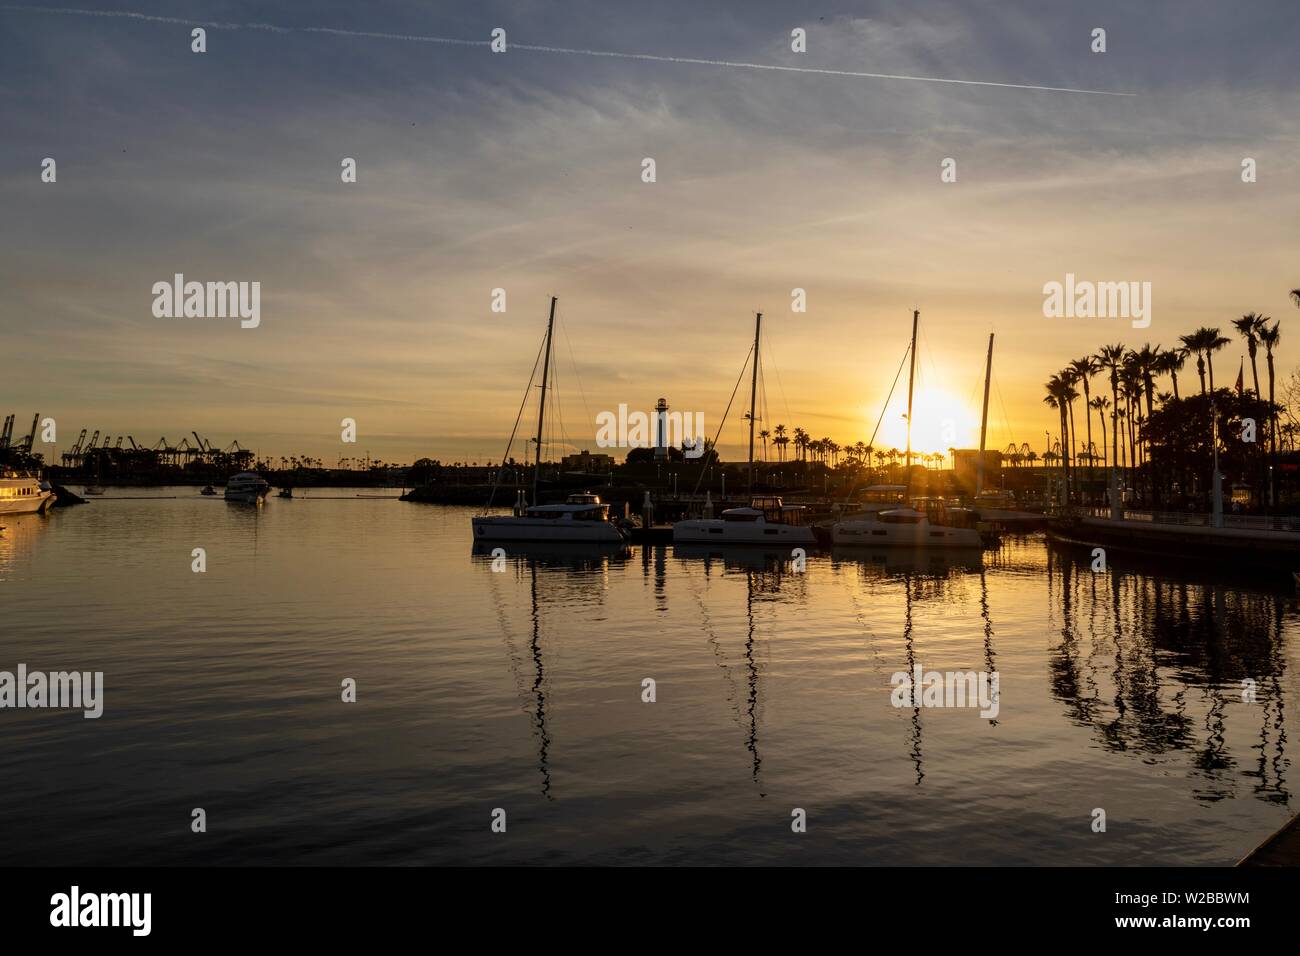 Boats moored in a harbor during sunset Stock Photo